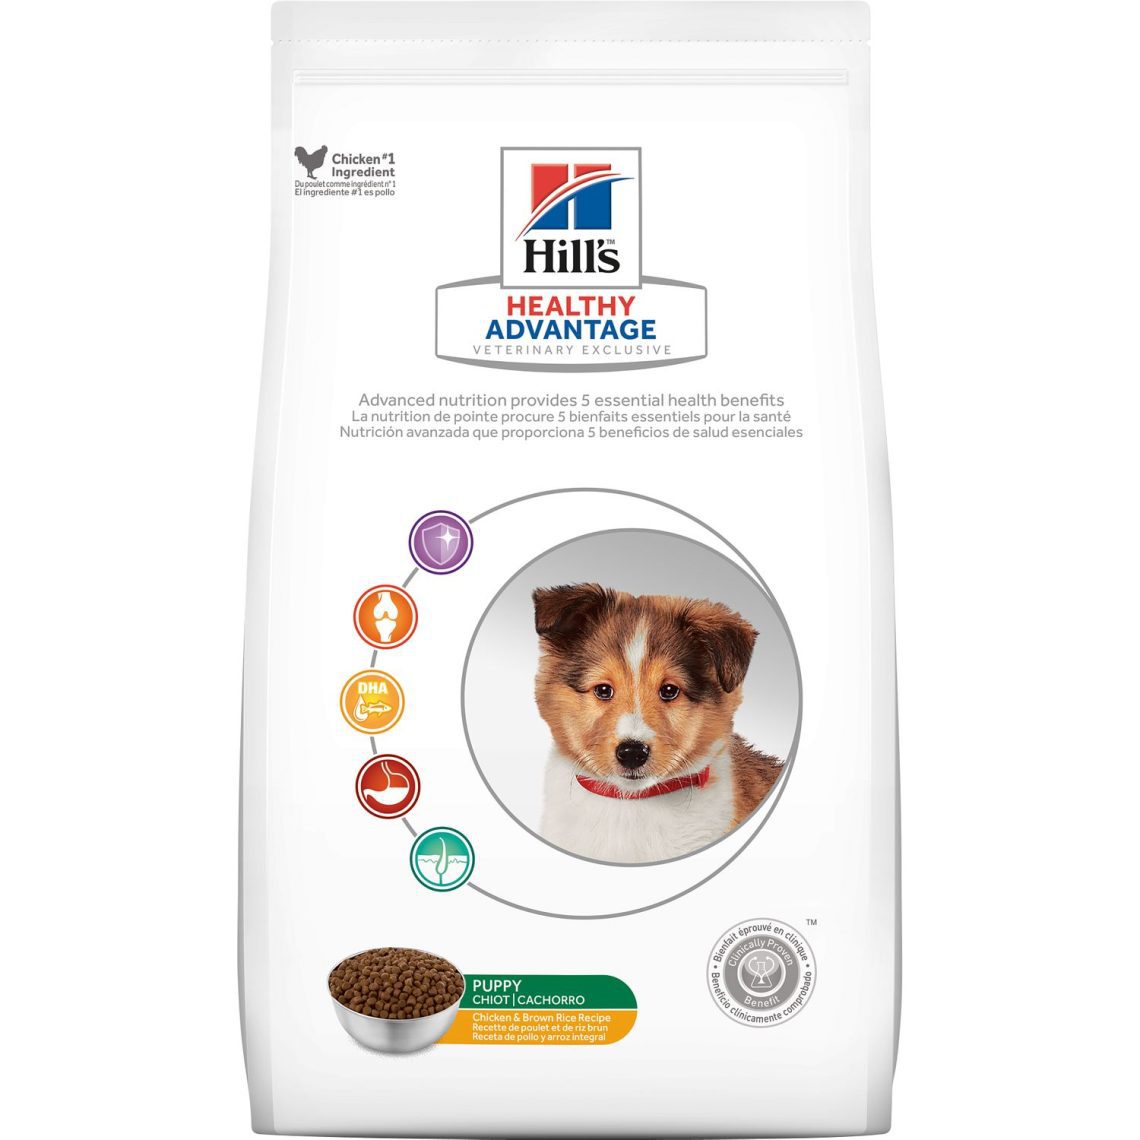 Hill&#8217;s Puppy Food: Quality Ingredients for Health and Nutrition